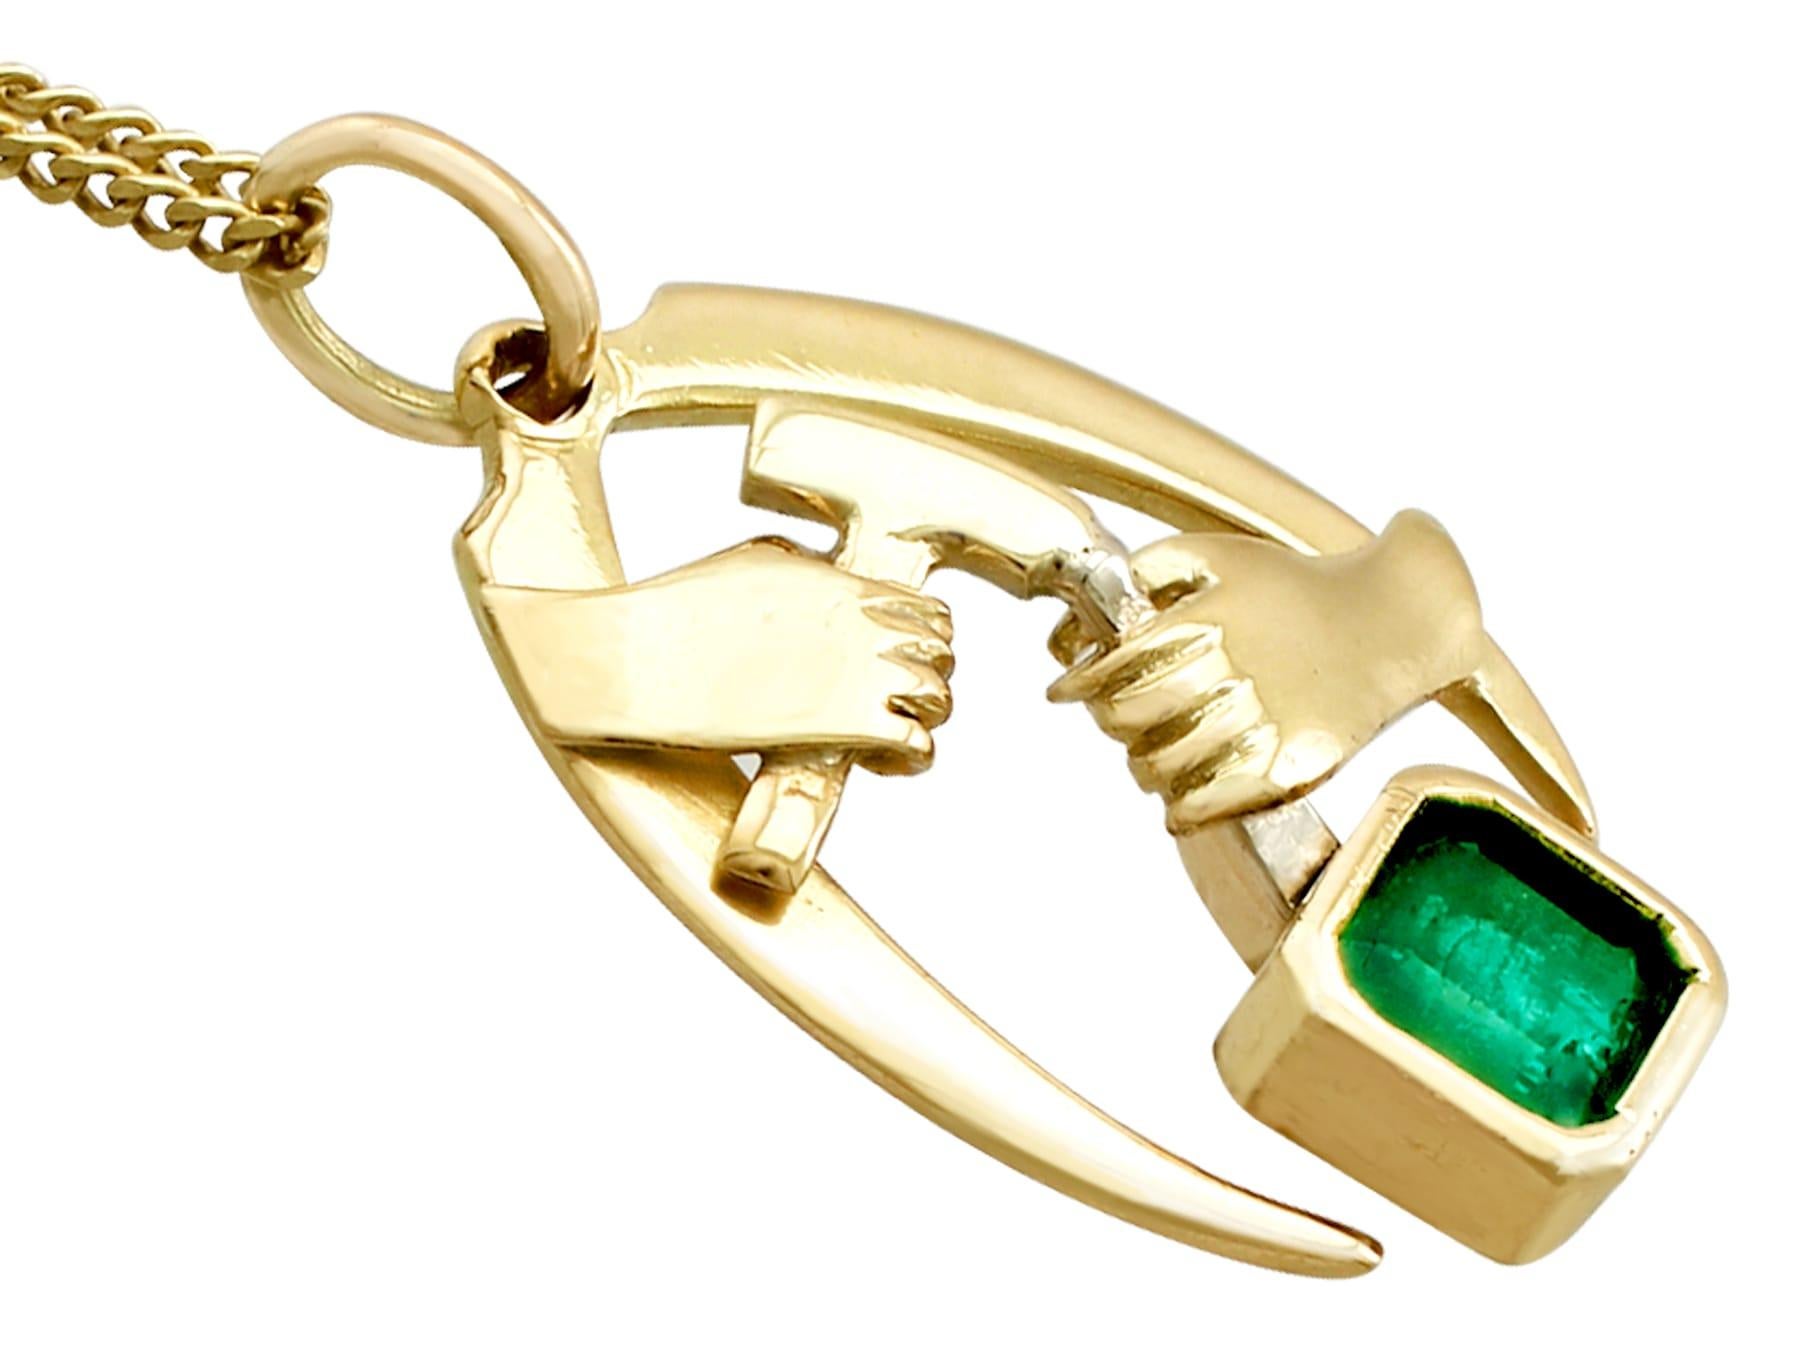 Square Cut Vintage 1.07 Carat Emerald and 18K Yellow Gold Pendant Circa 1990 For Sale